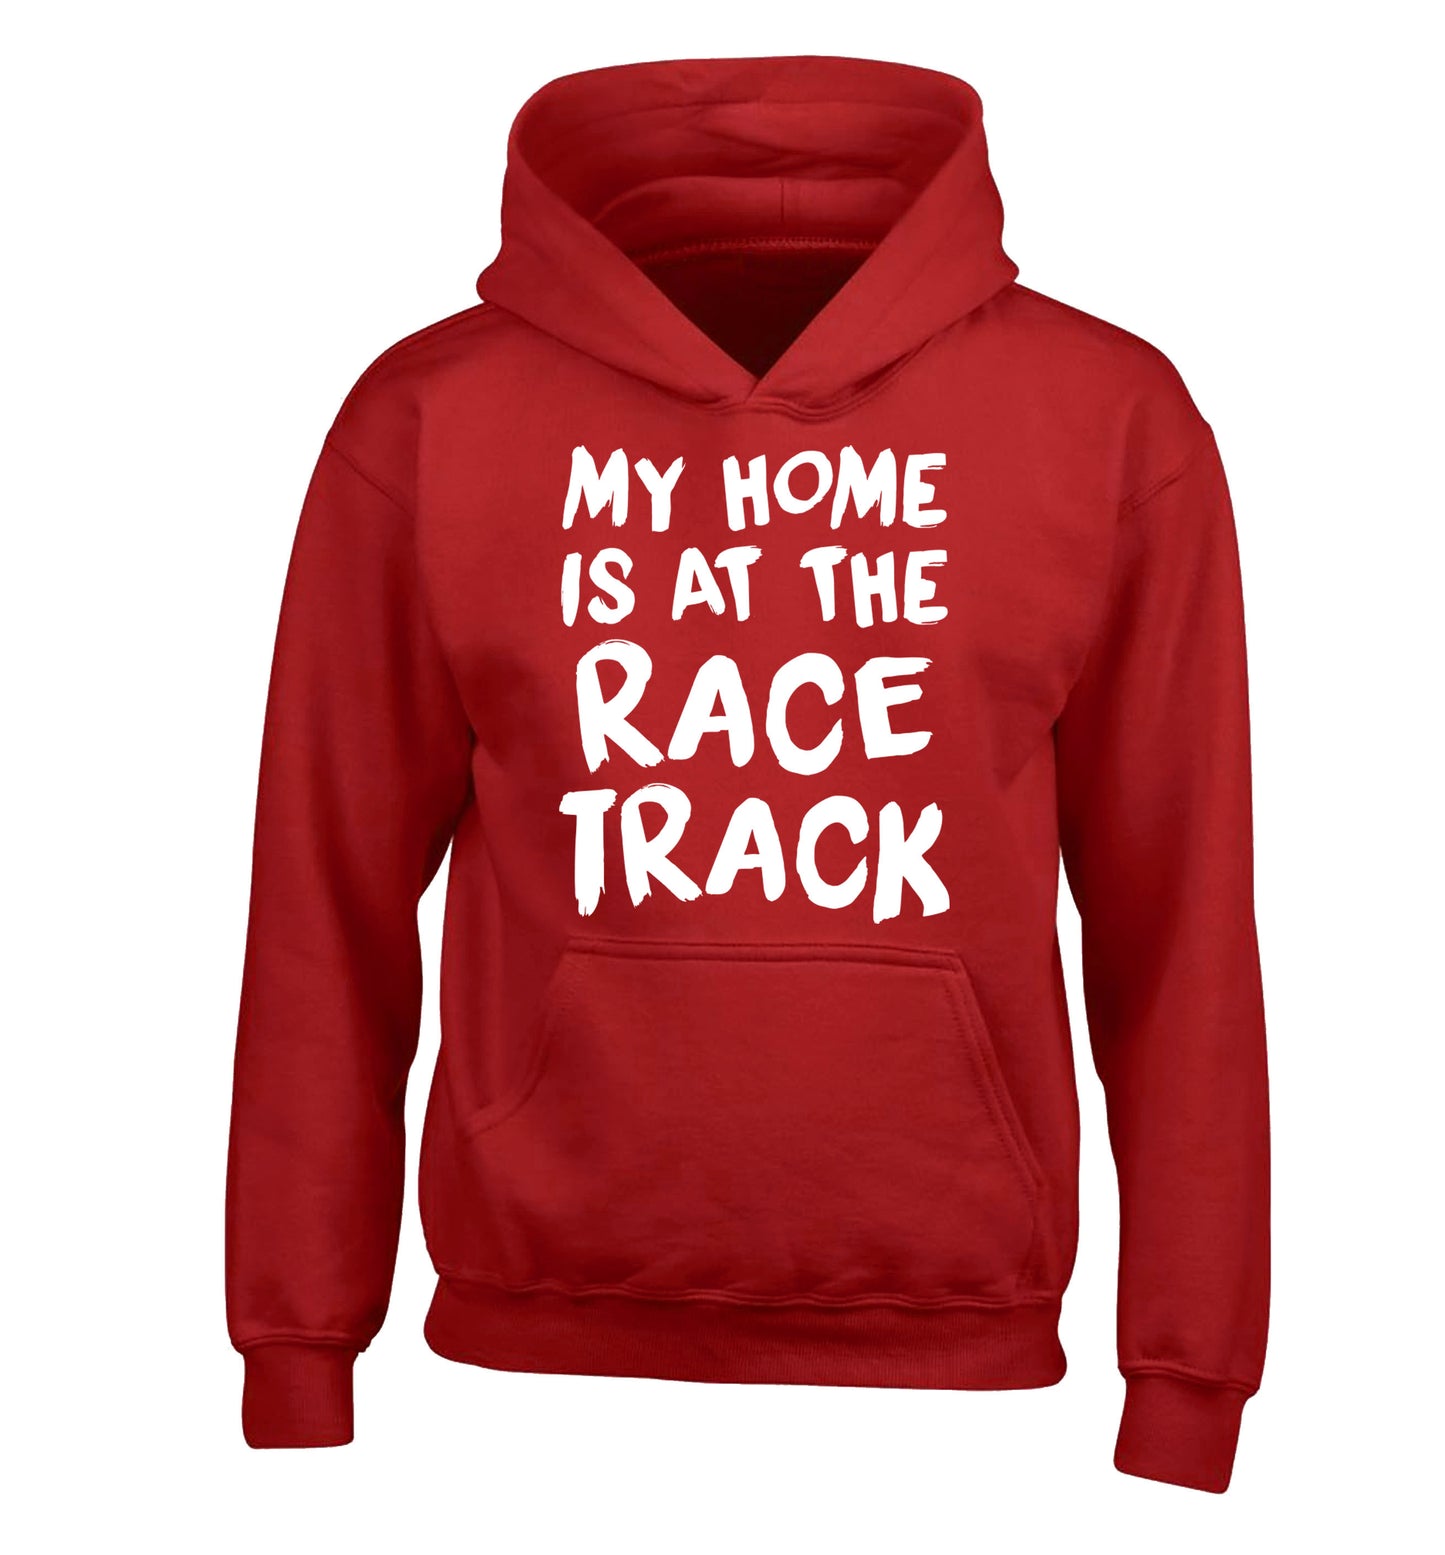 My home is at the race track children's red hoodie 12-14 Years